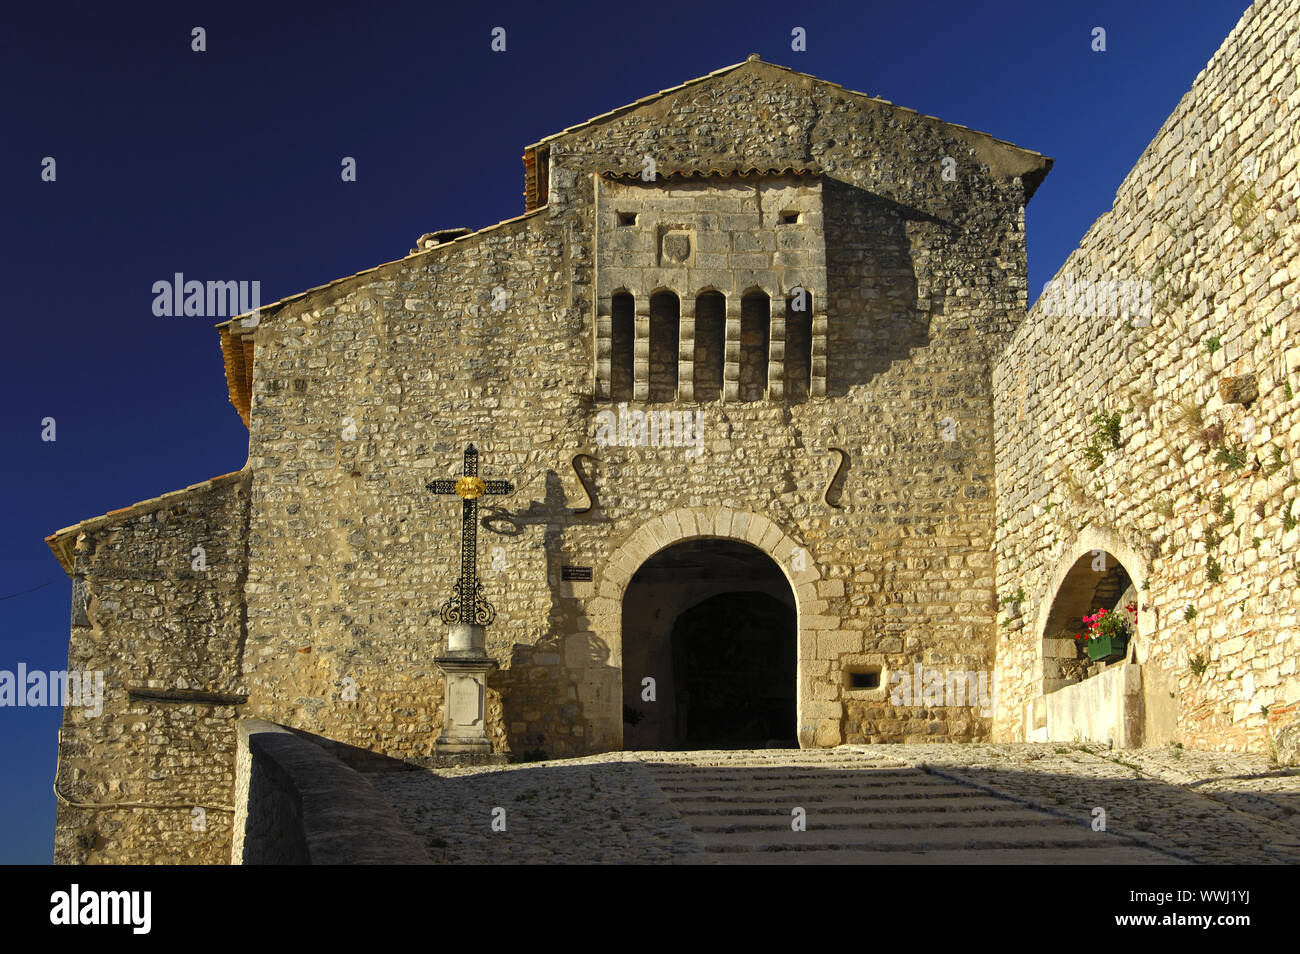 Banon city fortification, France Stock Photo